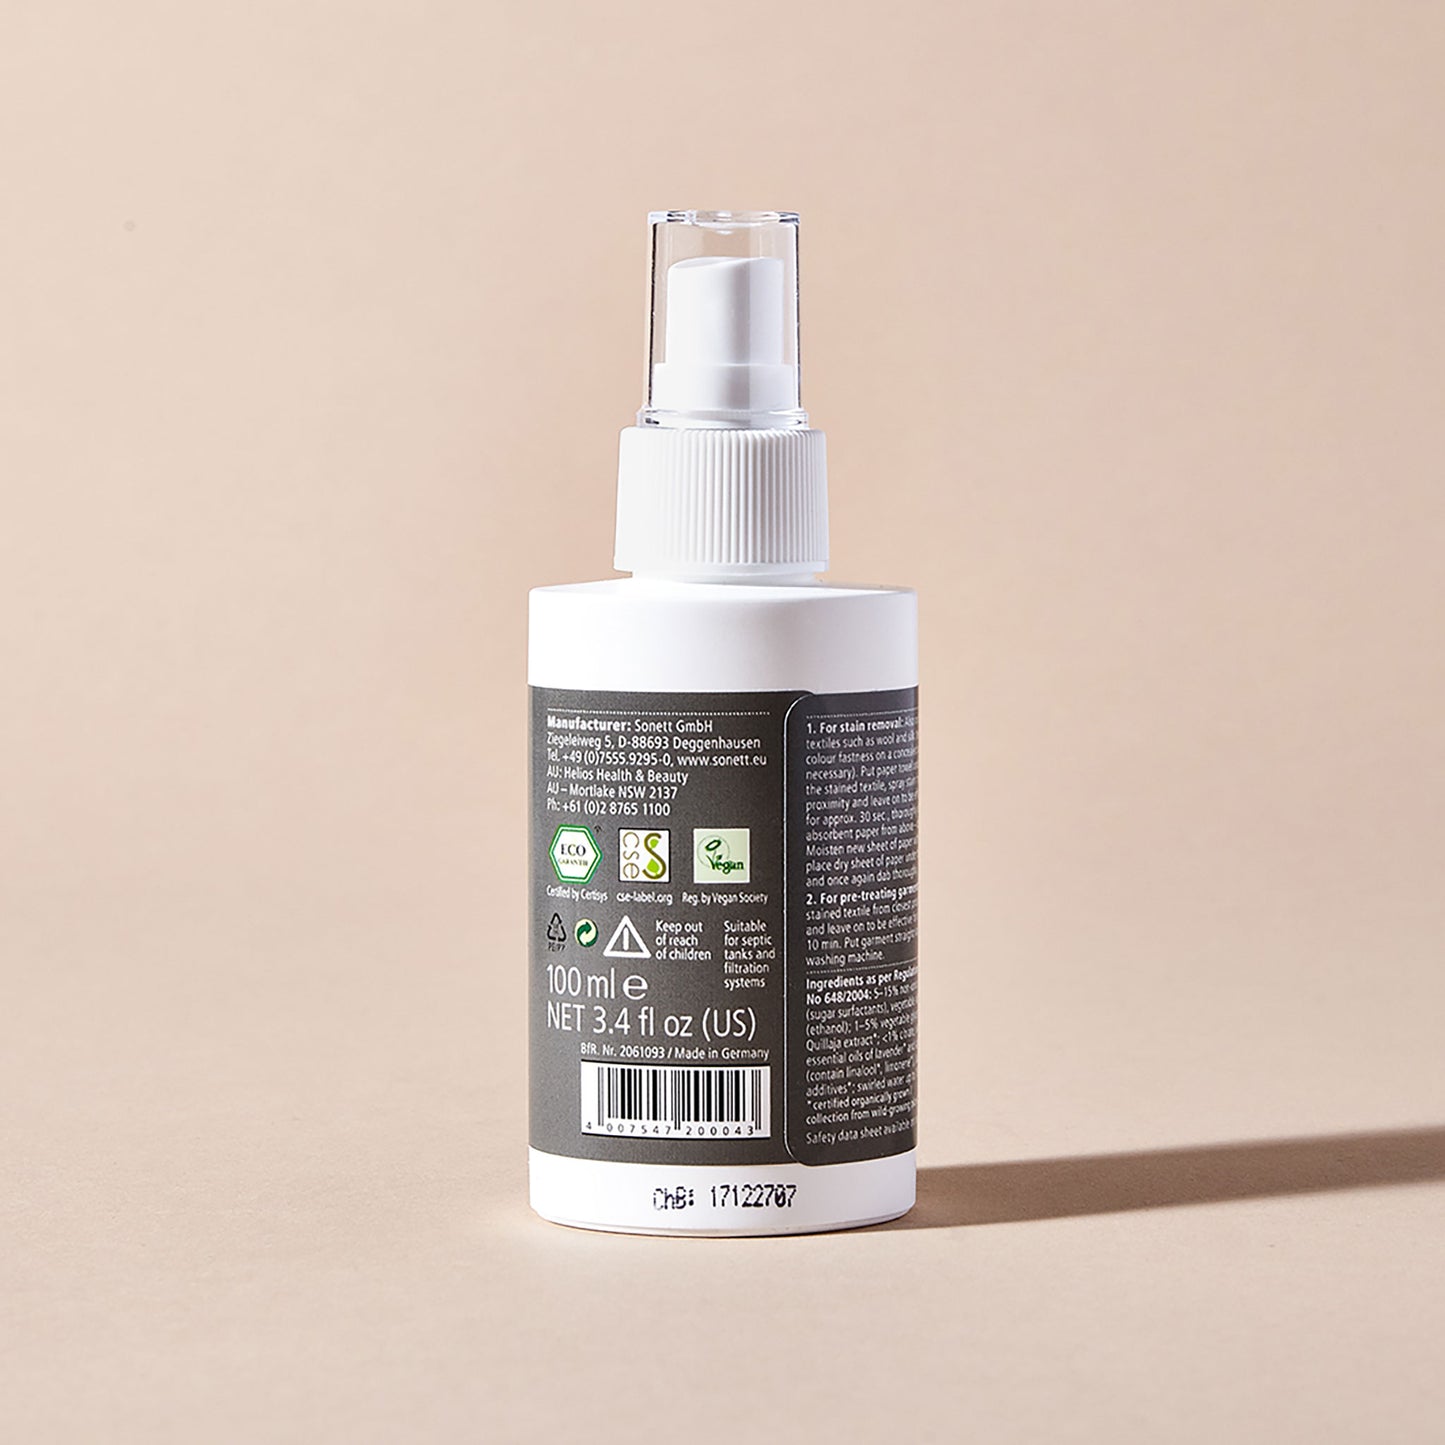 A white spray bottle of Sonett eco-friendly stain removal spray with a grey label stating usage instructions and certifications, displayed on a beige backdrop